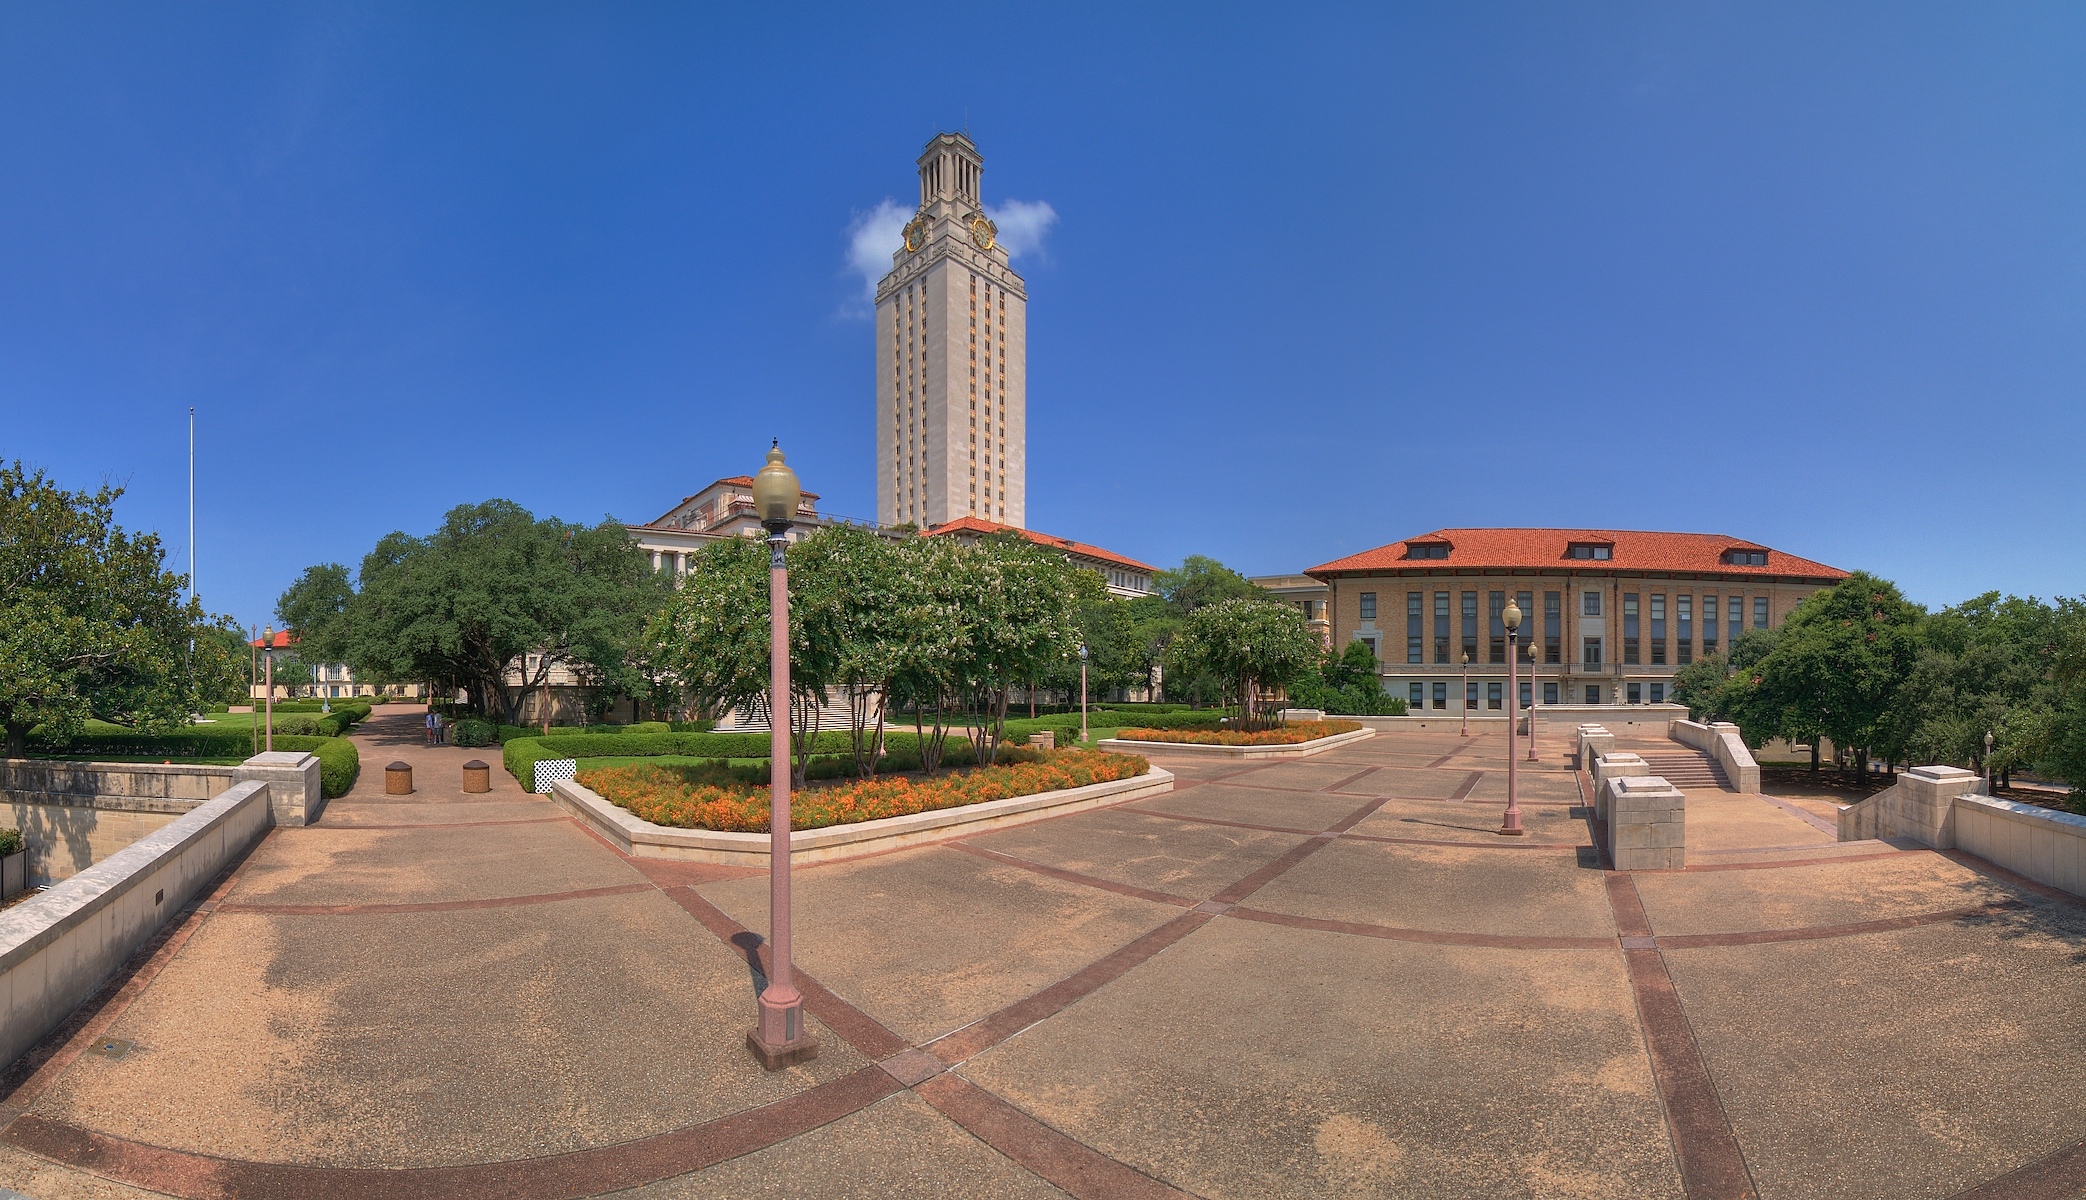 University%20of%20Texas%20at%20Austin,%20Tower%20from%20East%20Mall.jpg